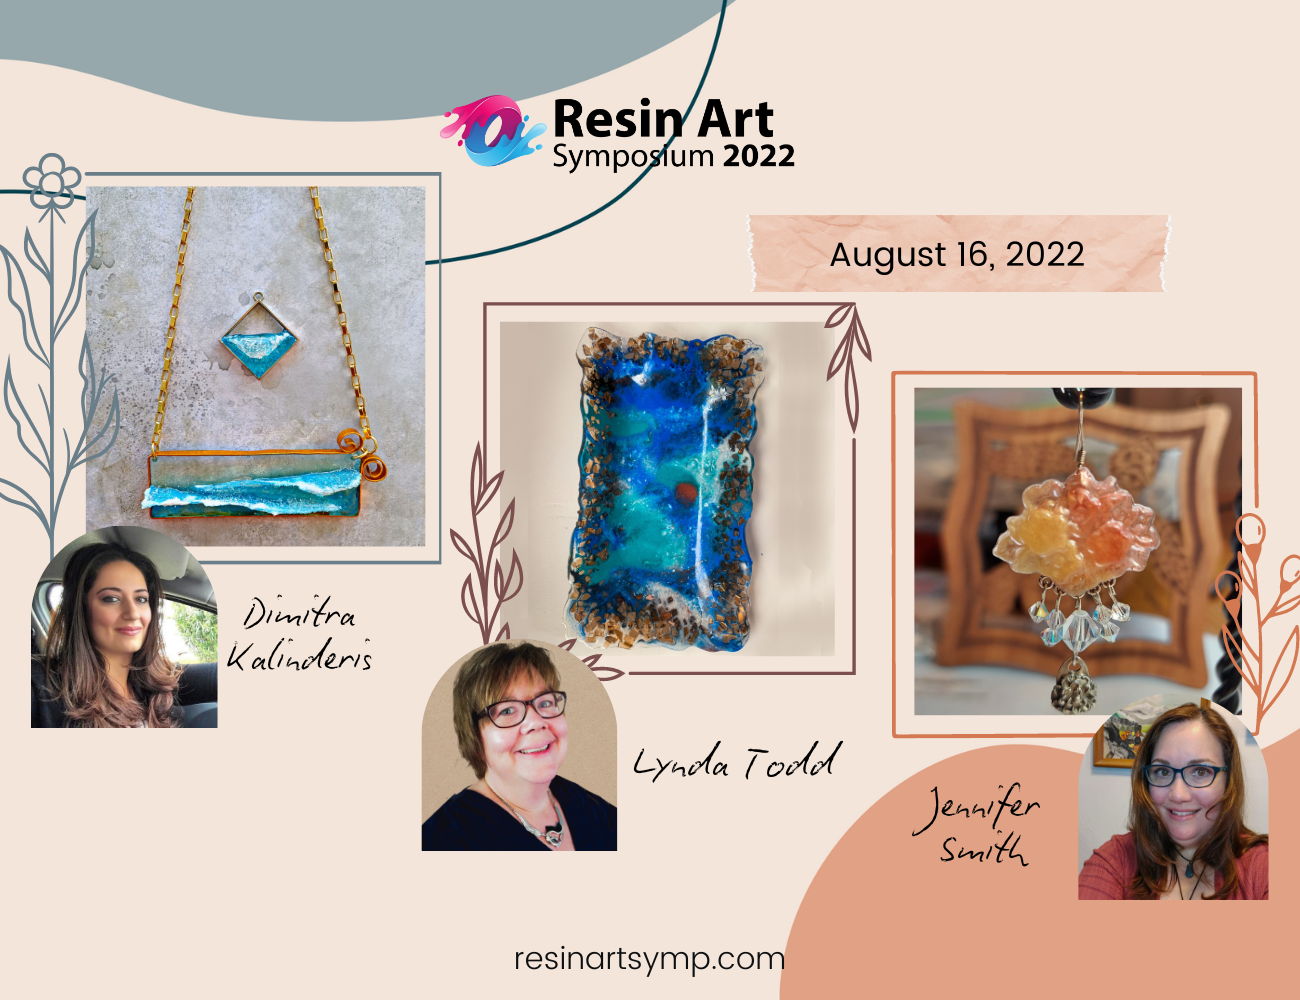 promotion for resin art symposium featuring Lynda Todd on August 16 at 1 p.m.